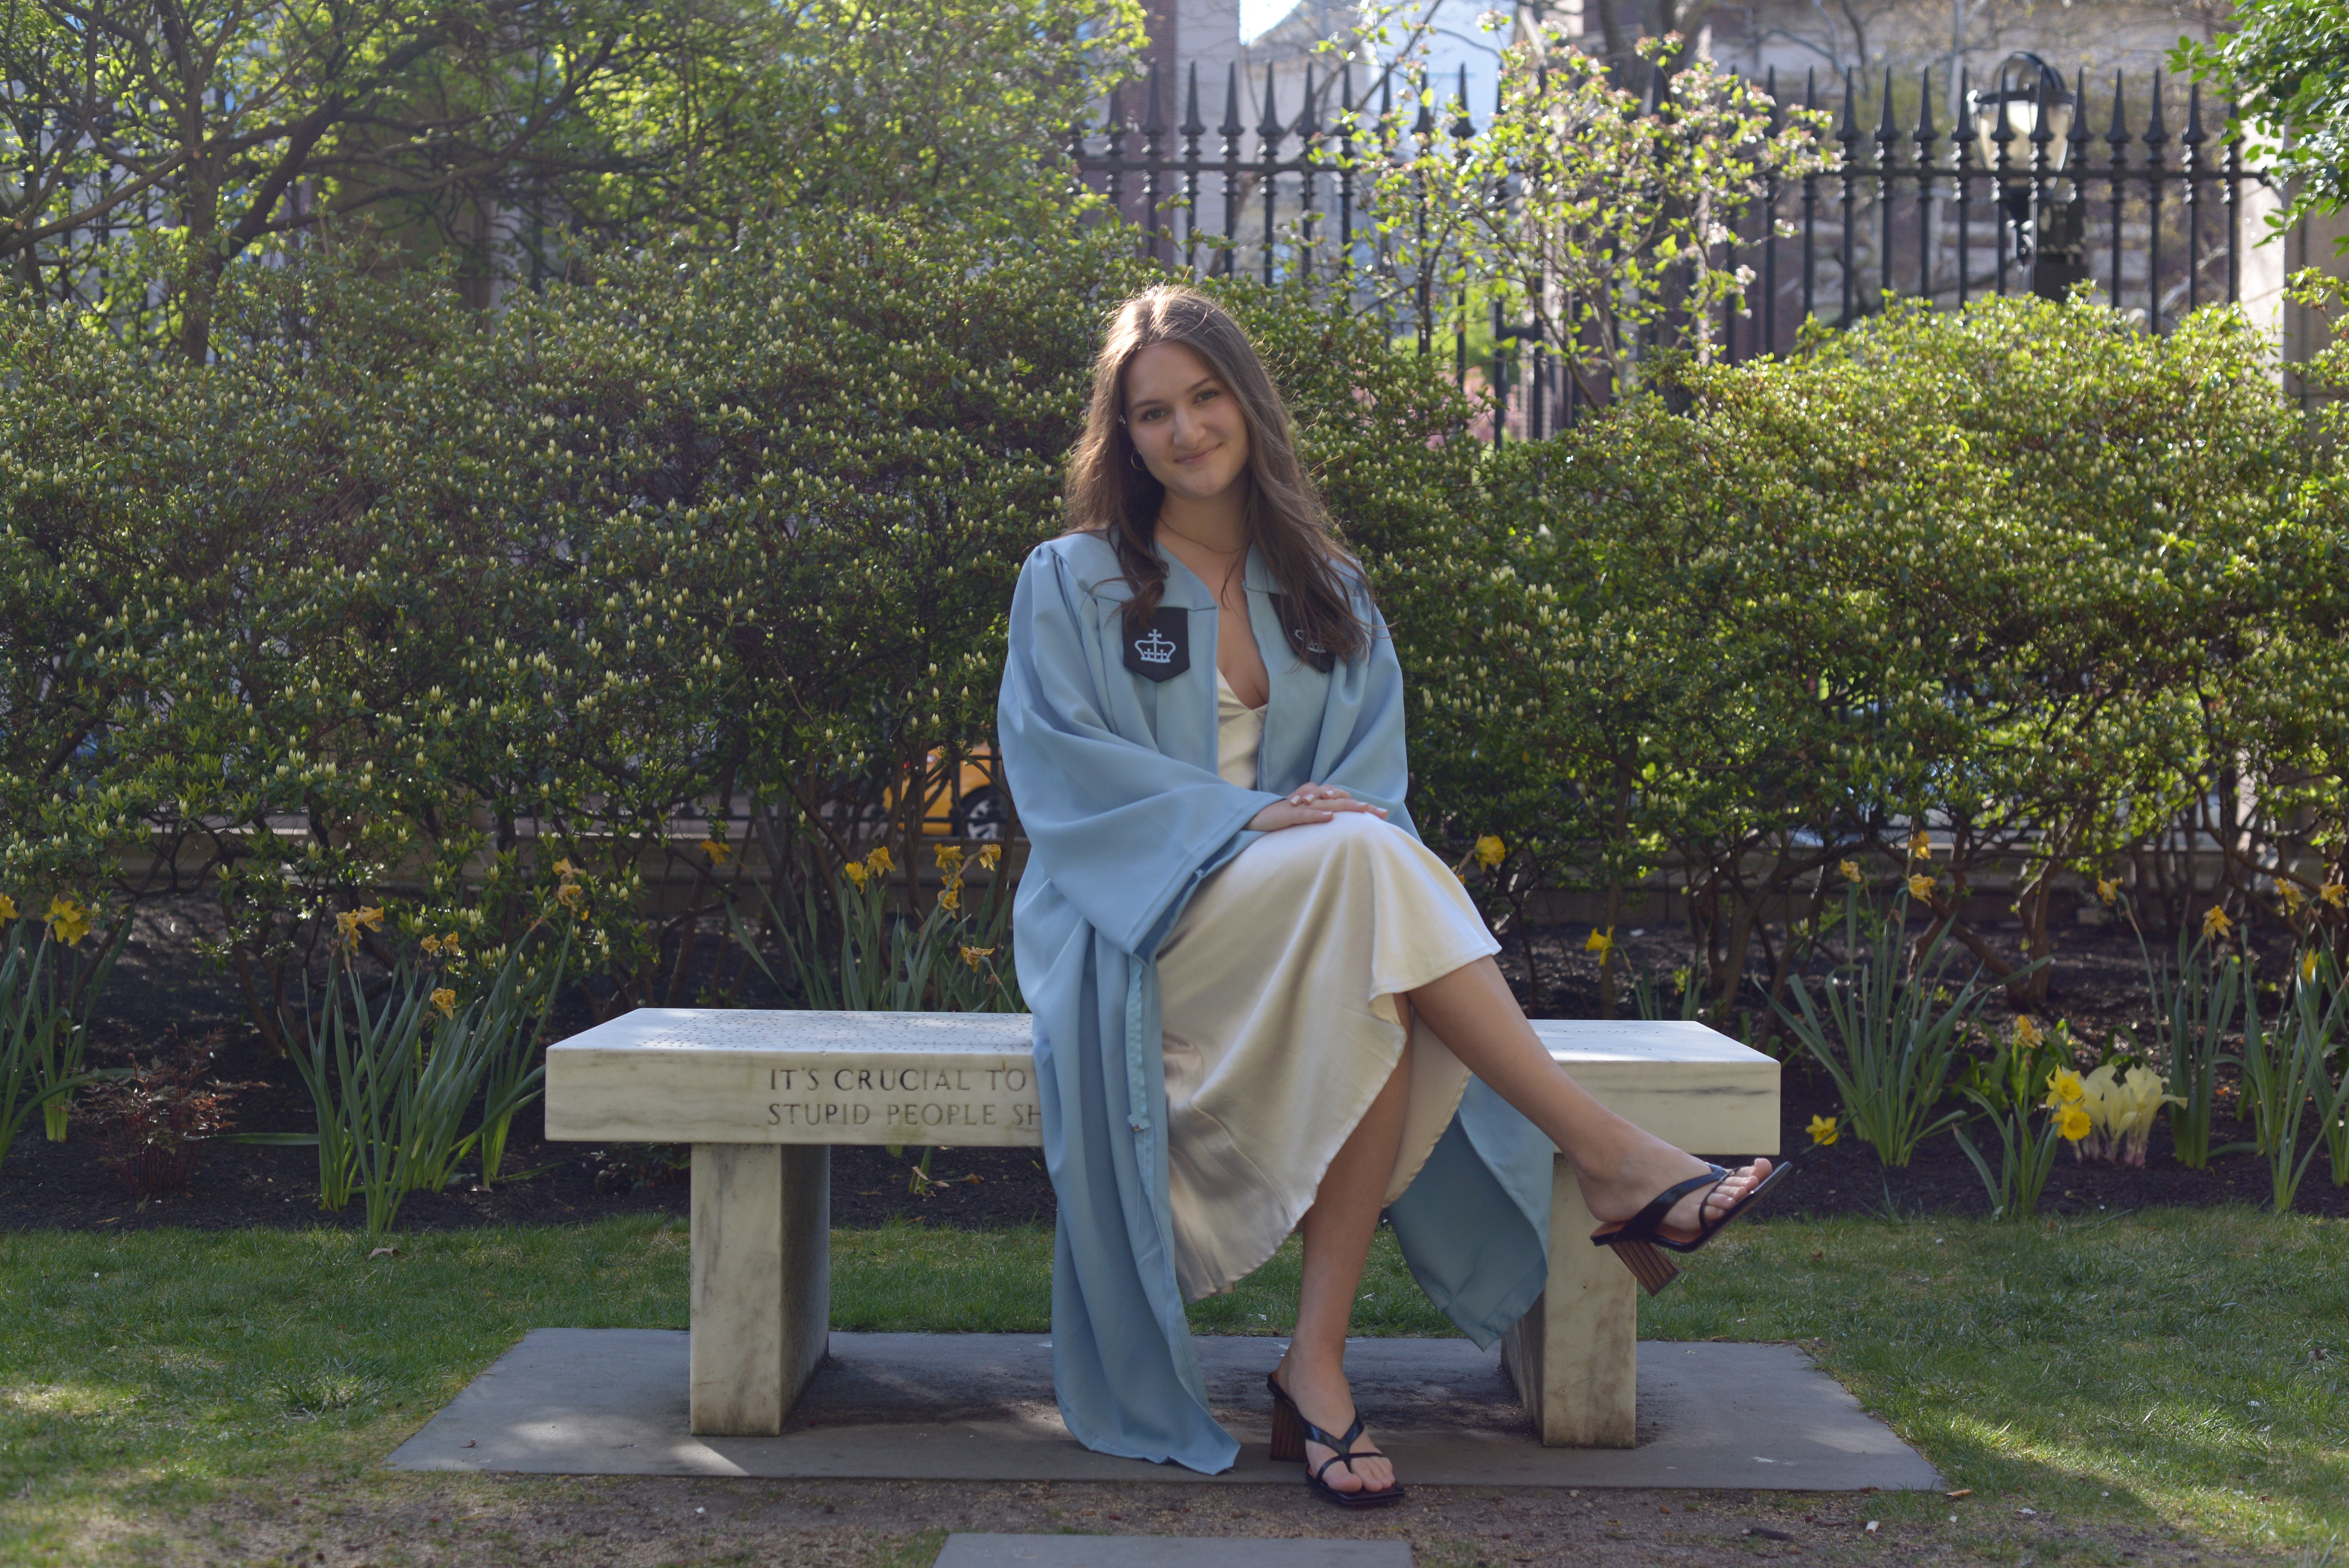 Lucia sitting on a stone bench on Barnard's campus in her cap and gown